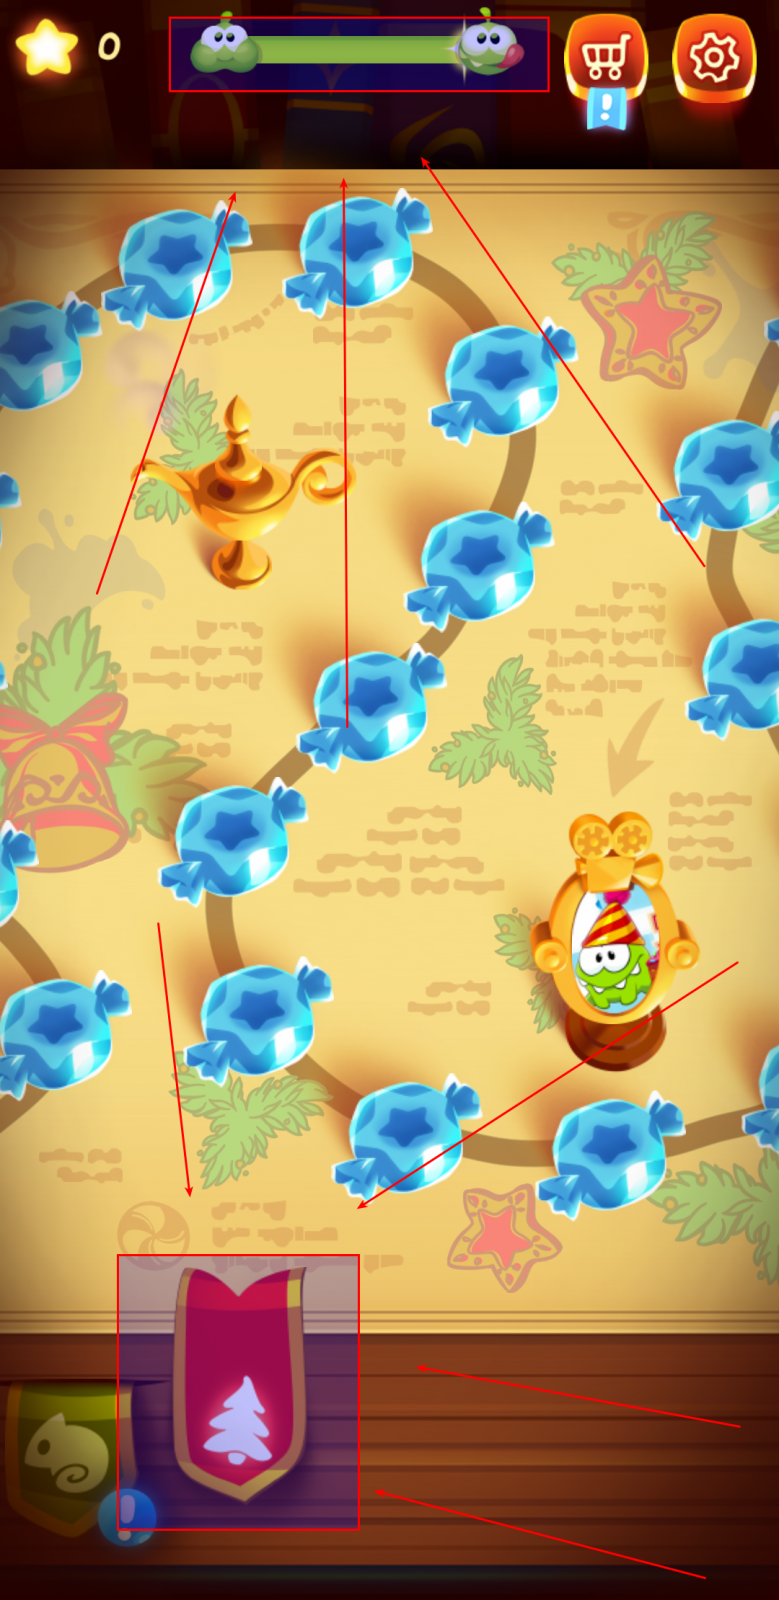 Cut the Rope: Magic v1.17.0 MOD APK -  - Android